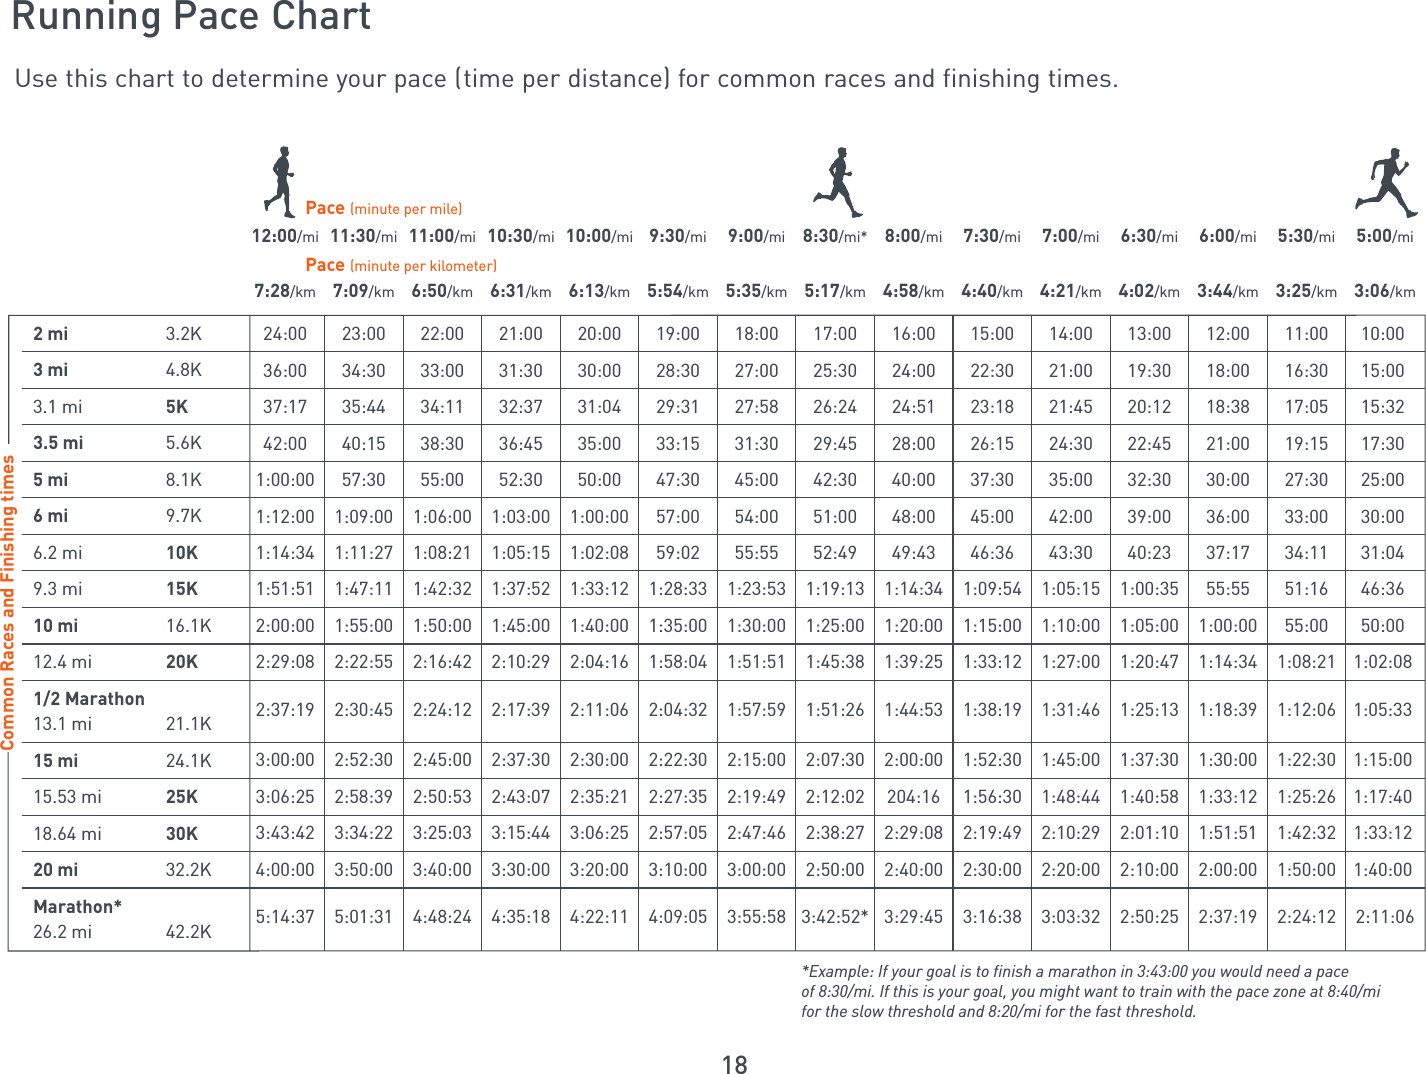 18Running Pace ChartUse this chart to determine your pace (time per distance) for common races and finishing times. 2 mi 3.2K3 mi 4.8K3.1 mi 5K  3.5 mi 5.6K5 mi 8.1K 6 mi 9.7K 6.2 mi 10K  9.3 mi 15K 10 mi 16.1K 12.4 mi 20K1/2 Marathon  13.1 mi 21.1K15 mi 24.1K 15.53 mi 25K  18.64 mi 30K 20 mi 32.2K Marathon*26.2 mi 42.2K*Example: If your goal is to finish a marathon in 3:43:00 you would need a paceof 8:30/mi. If this is your goal, you might want to train with the pace zone at 8:40/mi for the slow threshold and 8:20/mi for the fast threshold.Common Races and Finishing times12:00/mi7:28/km24:00 36:00 37:17 42:00 1:00:00 1:12:00 1:14:34 1:51:51 2:00:00 2:29:08 2:37:19 3:00:00 3:06:25 3:43:42 4:00:00 5:14:3711:30/mi7:09/km23:00 34:30 35:44 40:15 57:30 1:09:00 1:11:27 1:47:11 1:55:00 2:22:55 2:30:45 2:52:30 2:58:39 3:34:22 3:50:00 5:01:3111:00/mi6:50/km22:00 33:00 34:11 38:30 55:00 1:06:00 1:08:21 1:42:32 1:50:00 2:16:42 2:24:12 2:45:00 2:50:53 3:25:03 3:40:00 4:48:2410:30/mi6:31/km21:00 31:30 32:37 36:45 52:30 1:03:00 1:05:15 1:37:52 1:45:00 2:10:29 2:17:39 2:37:30 2:43:07 3:15:44 3:30:00 4:35:1810:00/mi6:13/km20:00 30:00 31:04 35:00 50:00 1:00:00 1:02:08 1:33:12 1:40:00 2:04:16 2:11:06 2:30:00 2:35:21 3:06:25 3:20:00 4:22:119:30/mi5:54/km19:00 28:30 29:31 33:15 47:30 57:00 59:02 1:28:33 1:35:00 1:58:04 2:04:32 2:22:30 2:27:35 2:57:05 3:10:00 4:09:059:00/mi5:35/km18:00 27:00 27:58 31:30 45:00 54:00 55:55 1:23:53 1:30:00 1:51:51 1:57:59 2:15:00 2:19:49 2:47:46 3:00:00 3:55:588:30/mi*5:17/km17:00 25:30 26:24 29:45 42:30 51:00 52:49 1:19:13 1:25:00 1:45:38 1:51:26 2:07:30 2:12:02 2:38:27 2:50:00 3:42:52*8:00/mi4:58/km16:00 24:00 24:51 28:00 40:00 48:00 49:43 1:14:34 1:20:00 1:39:25 1:44:53 2:00:00 204:16 2:29:08 2:40:00 3:29:457:30/mi4:40/km15:00 22:30 23:18 26:15 37:30 45:00 46:36 1:09:54 1:15:00 1:33:12 1:38:19 1:52:30 1:56:30 2:19:49 2:30:00 3:16:387:00/mi4:21/km14:00 21:00 21:45 24:30 35:00 42:00 43:30 1:05:15 1:10:00 1:27:00 1:31:46 1:45:00 1:48:44 2:10:29 2:20:00 3:03:326:30/mi4:02/km13:00 19:30 20:12 22:45 32:30 39:00 40:23 1:00:35 1:05:00 1:20:47 1:25:13 1:37:30 1:40:58 2:01:10 2:10:00 2:50:256:00/mi3:44/km12:00 18:00 18:38 21:00 30:00 36:00 37:17 55:55 1:00:00 1:14:34 1:18:39 1:30:00 1:33:12 1:51:51 2:00:00 2:37:195:30/mi3:25/km11:00 16:30 17:05 19:15 27:30 33:00 34:11 51:16 55:00 1:08:21 1:12:06 1:22:30 1:25:26 1:42:32 1:50:00 2:24:125:00/mi3:06/km10:00 15:00 15:32 17:30 25:00 30:00 31:04 46:36 50:00 1:02:08 1:05:33 1:15:00 1:17:40 1:33:12 1:40:00 2:11:06Pace (minute per mile) Pace (minute per kilometer) 